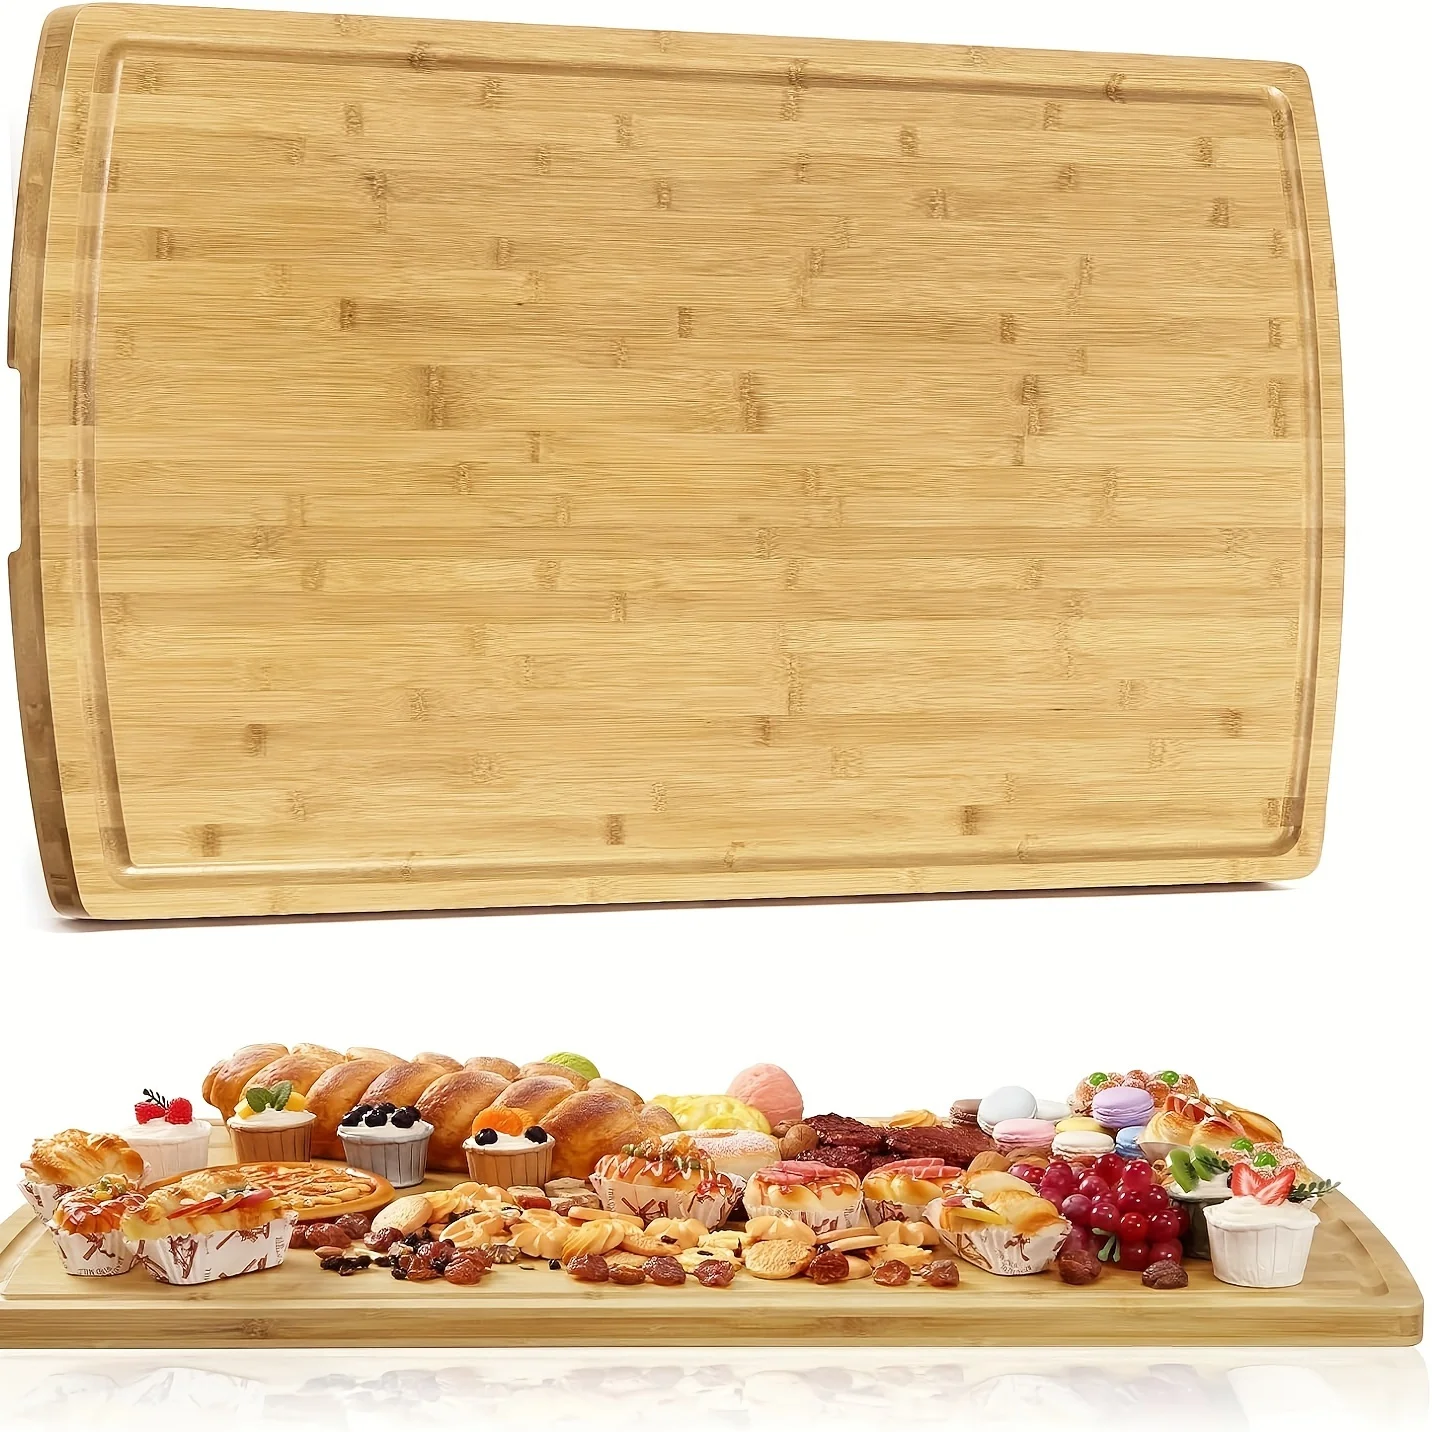 

Cutting Board 36 x 24 Inch, Bamboo Chopping Boards for Kitchen with Juice Groove and Handles, Extra Large Wood Stove Top Cover,